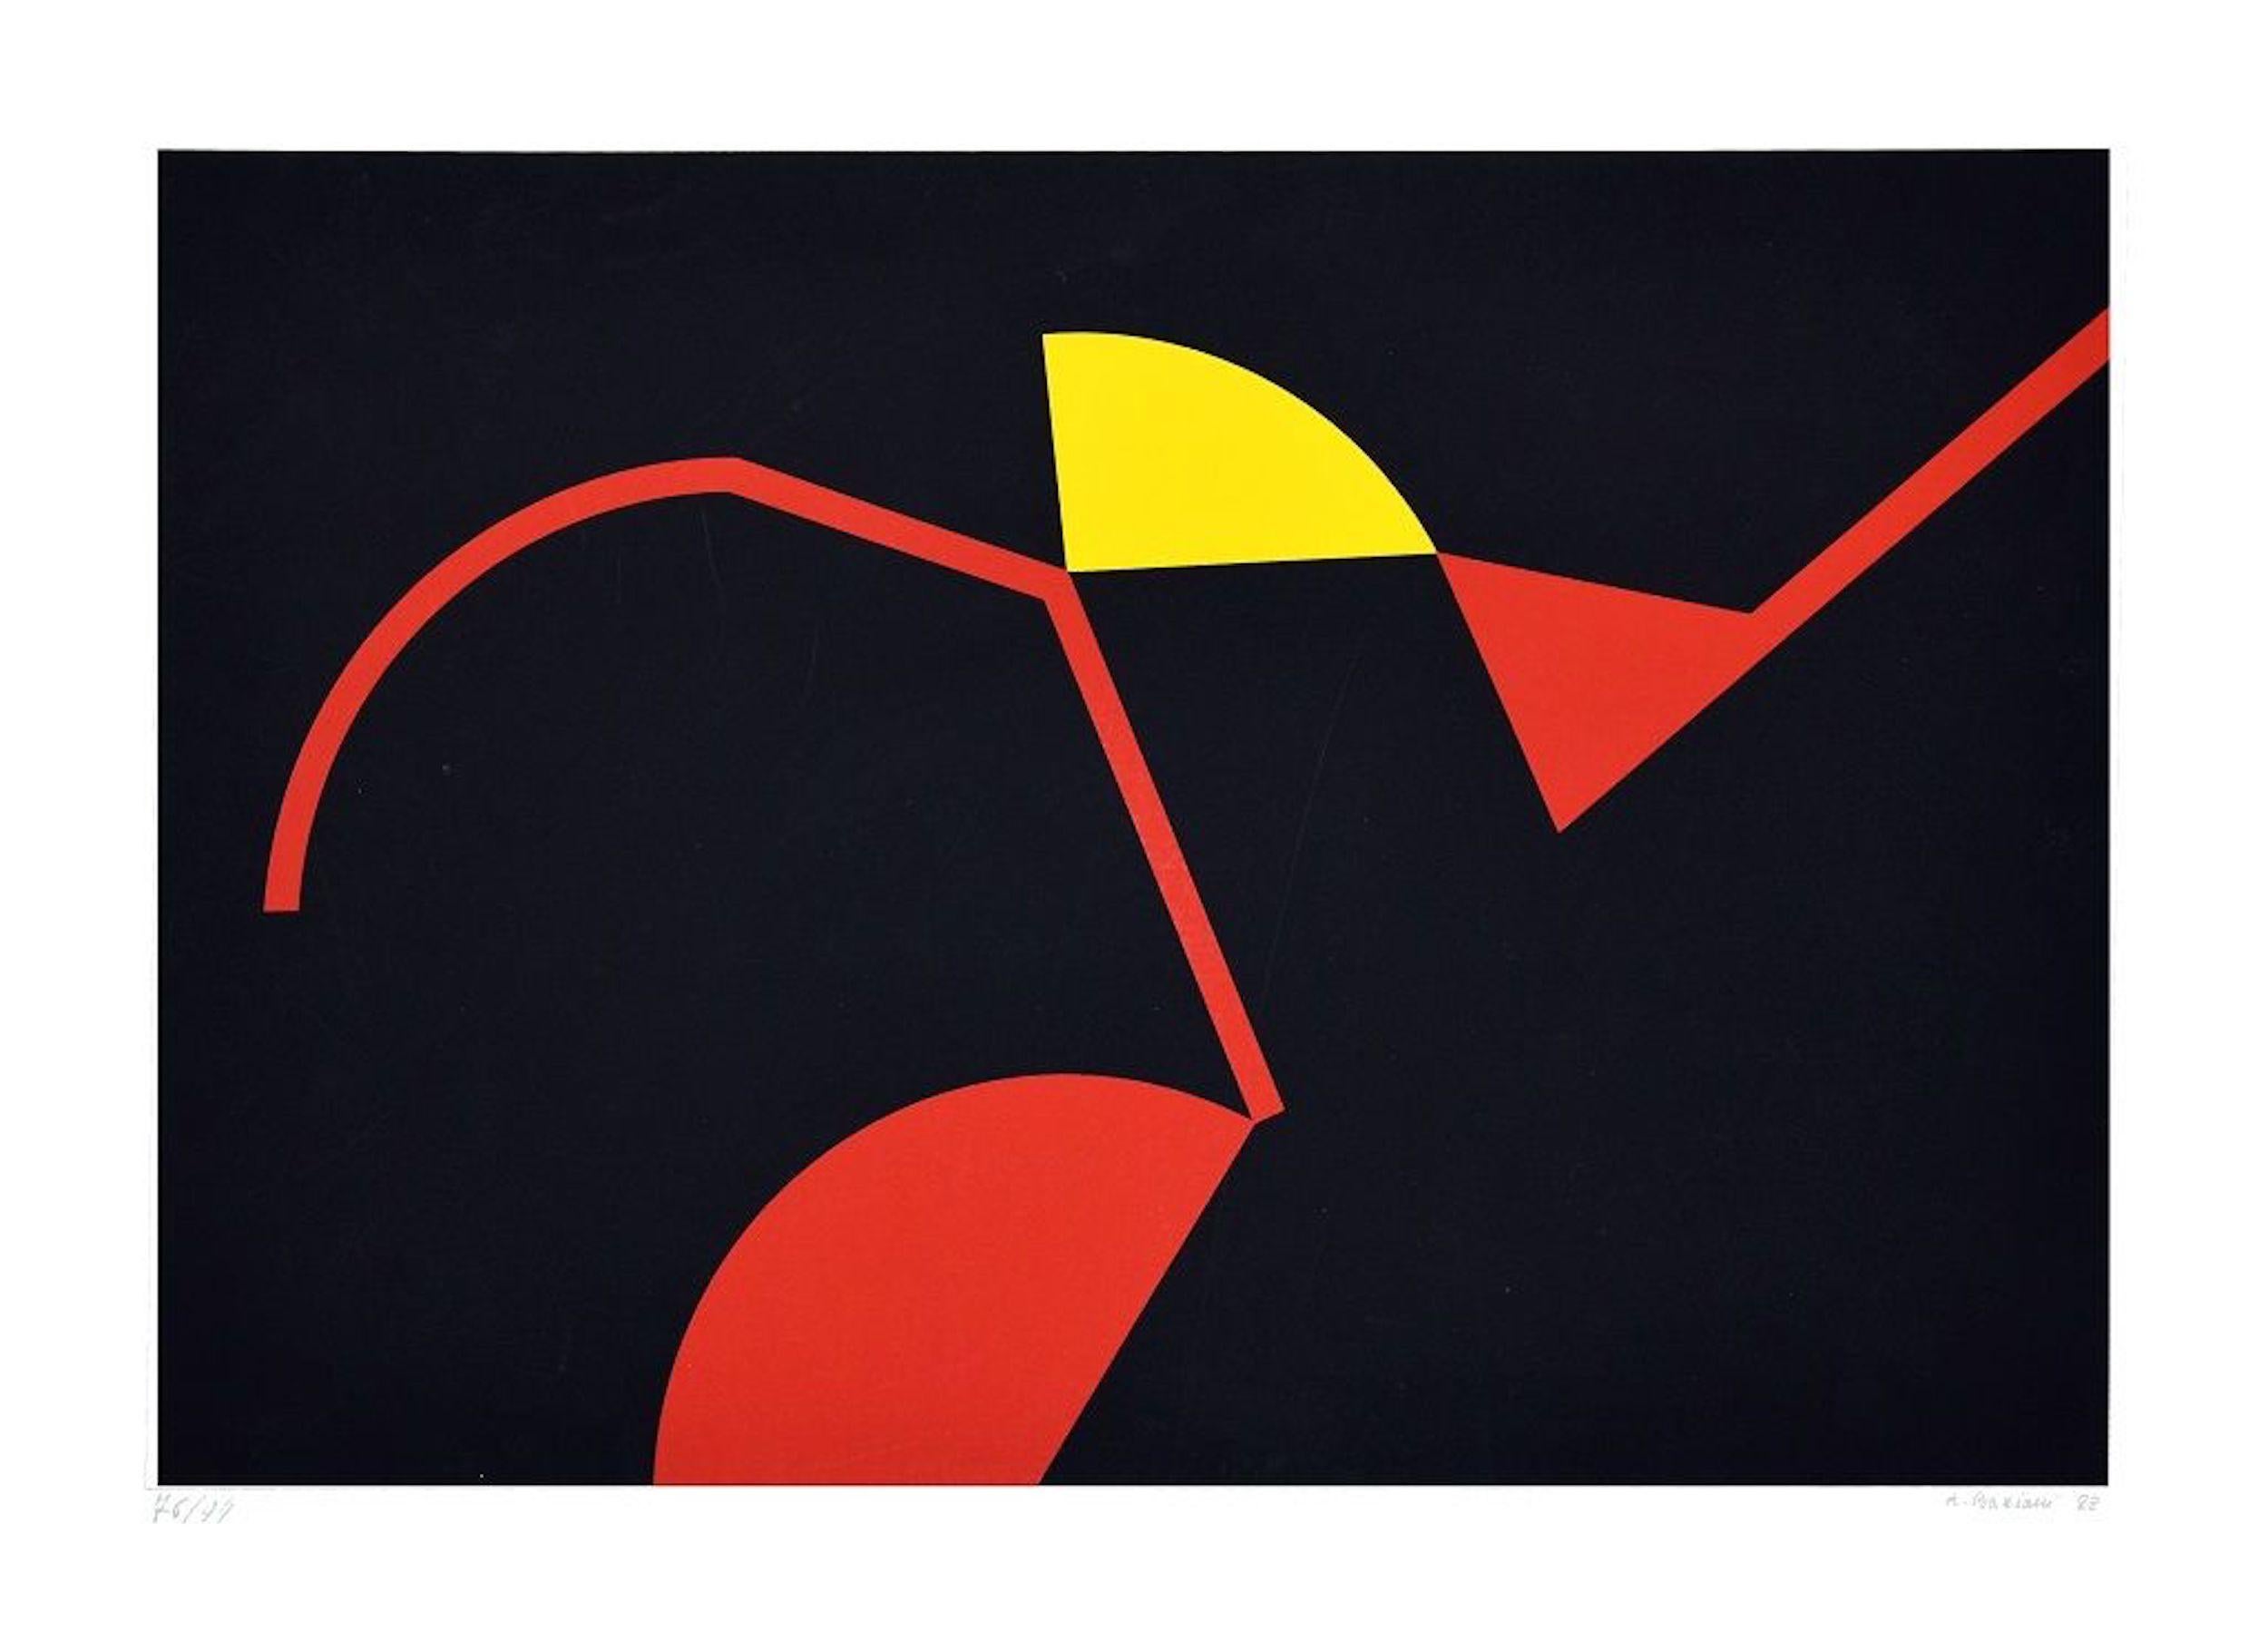 Tribal Colors is an original colored serigraph realized by Renato Barisani in 1983.

Hand-signed and dated in pencil on the lower right. Numbered in pencil on the lower left. Edition 76/99.

Good conditions.

This serigraph represents a red, yellow,